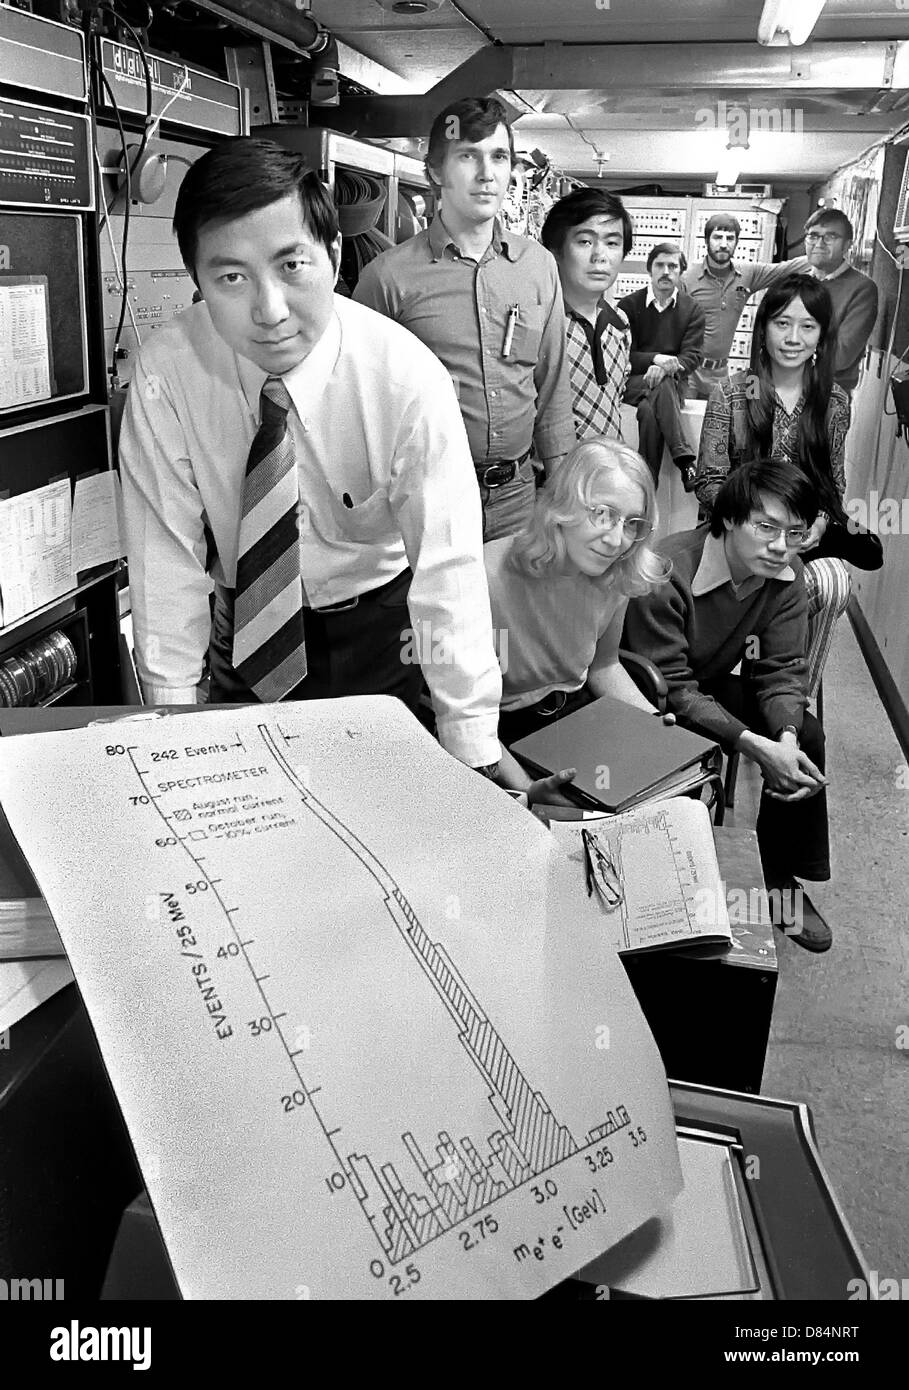 Nobel Laureate Samuel Ting of the Massachusetts Institute of Technology shown with his team at Brookhaven National Laboratory Alternating Gradient Synchrotron August 3, 1998 in Upton, NY. Ting and Burton Richter of the Stanford Linear Accelerator were awarded the 1976 Nobel Prize in physics for the discovery of charmonium, a particle made of a charmed quark bound to its antiquark. Stock Photo